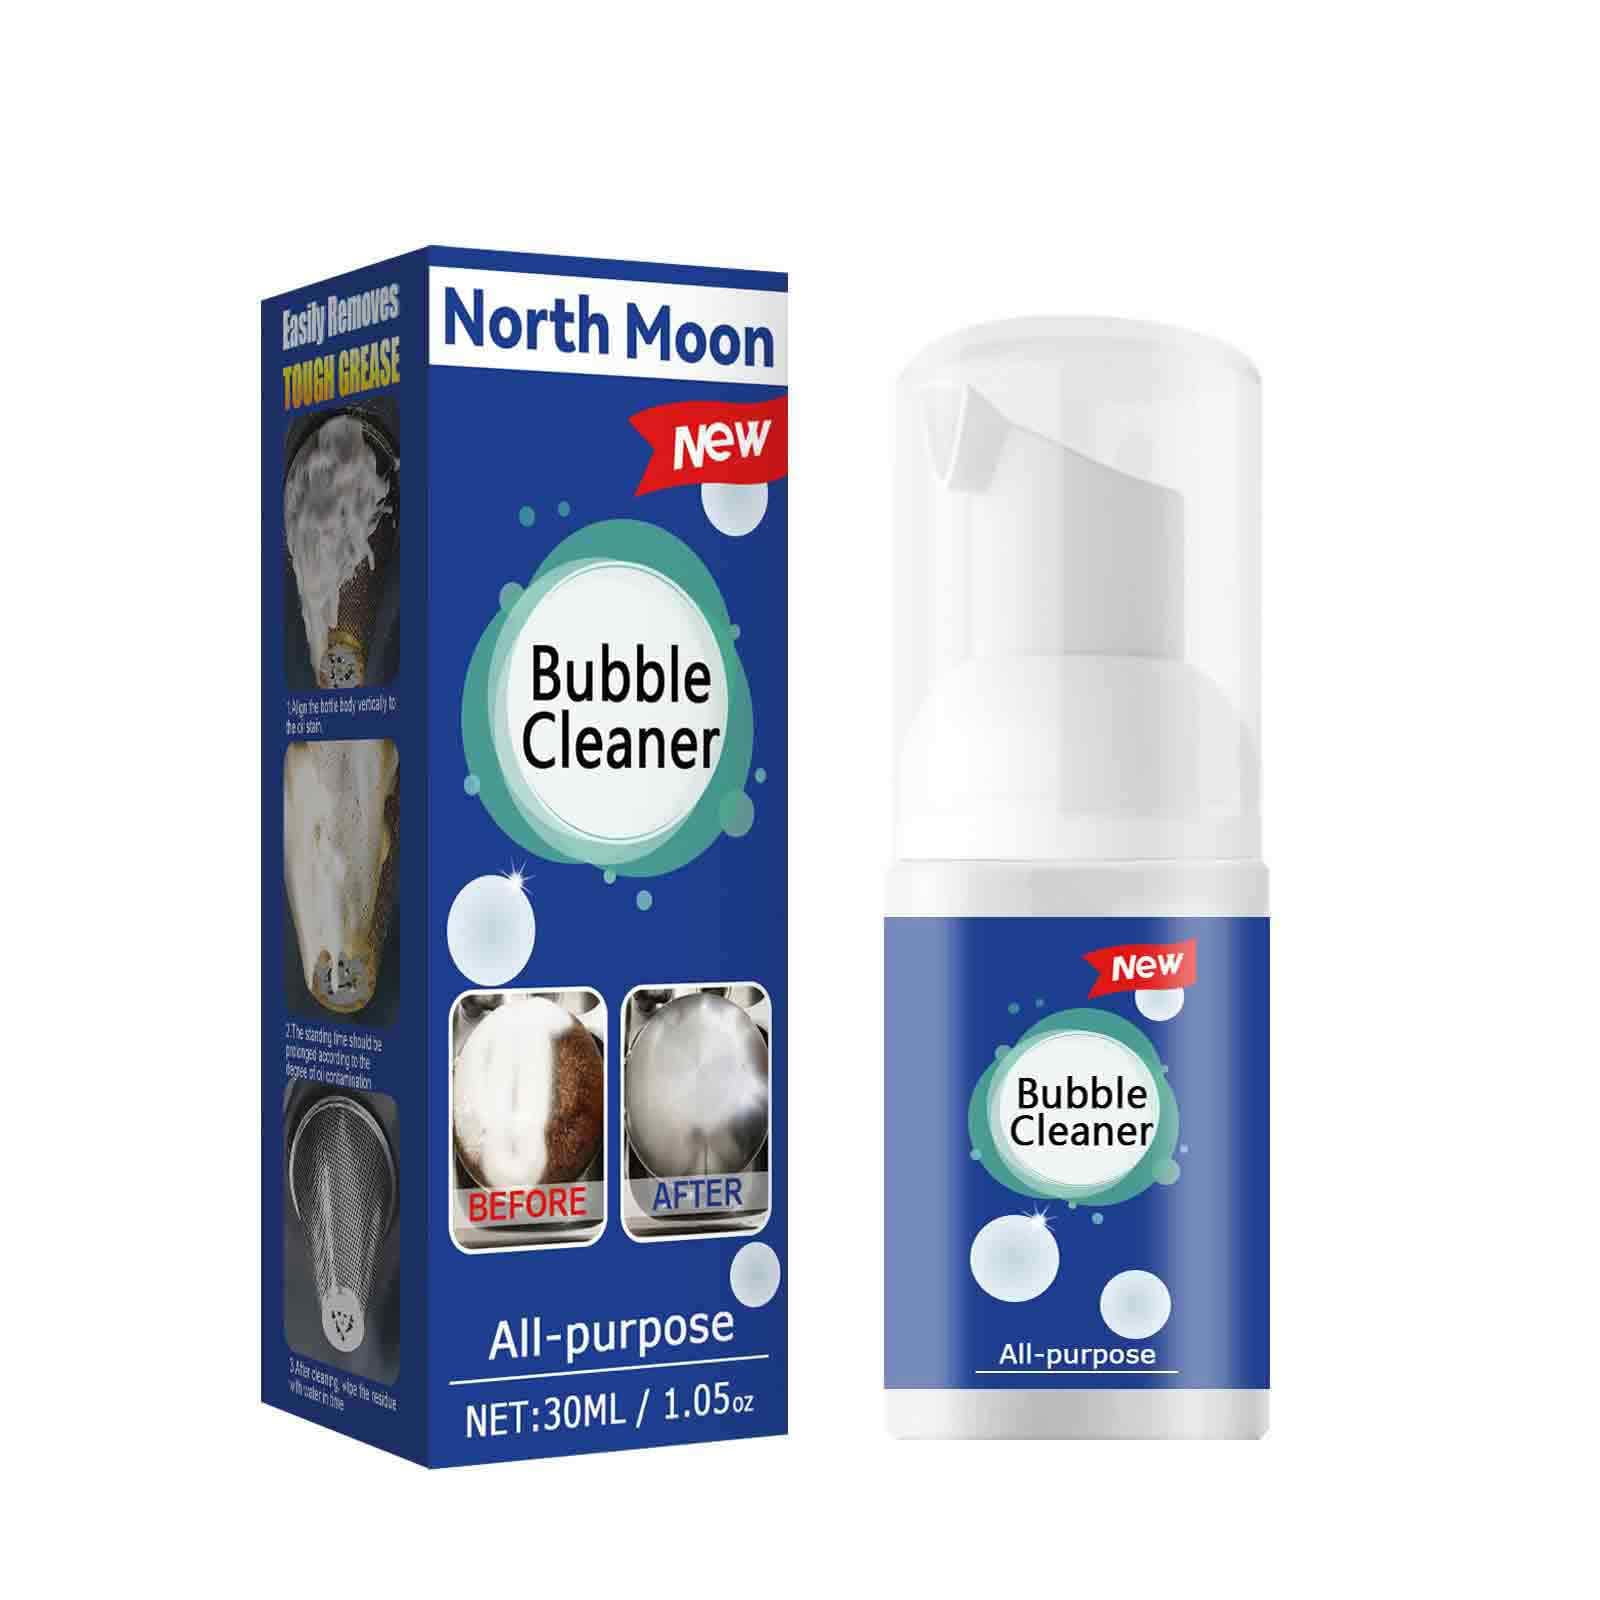 North Moon Bubble Cleaner - North Moon Bubble Cleaner Foam Spray, Northmoon  All-Purpose Bubble Cleaner for Kitchen Heavy Oil Stain, Rinse-free Bubble  Cleaning Spray (2pc) - Yahoo Shopping